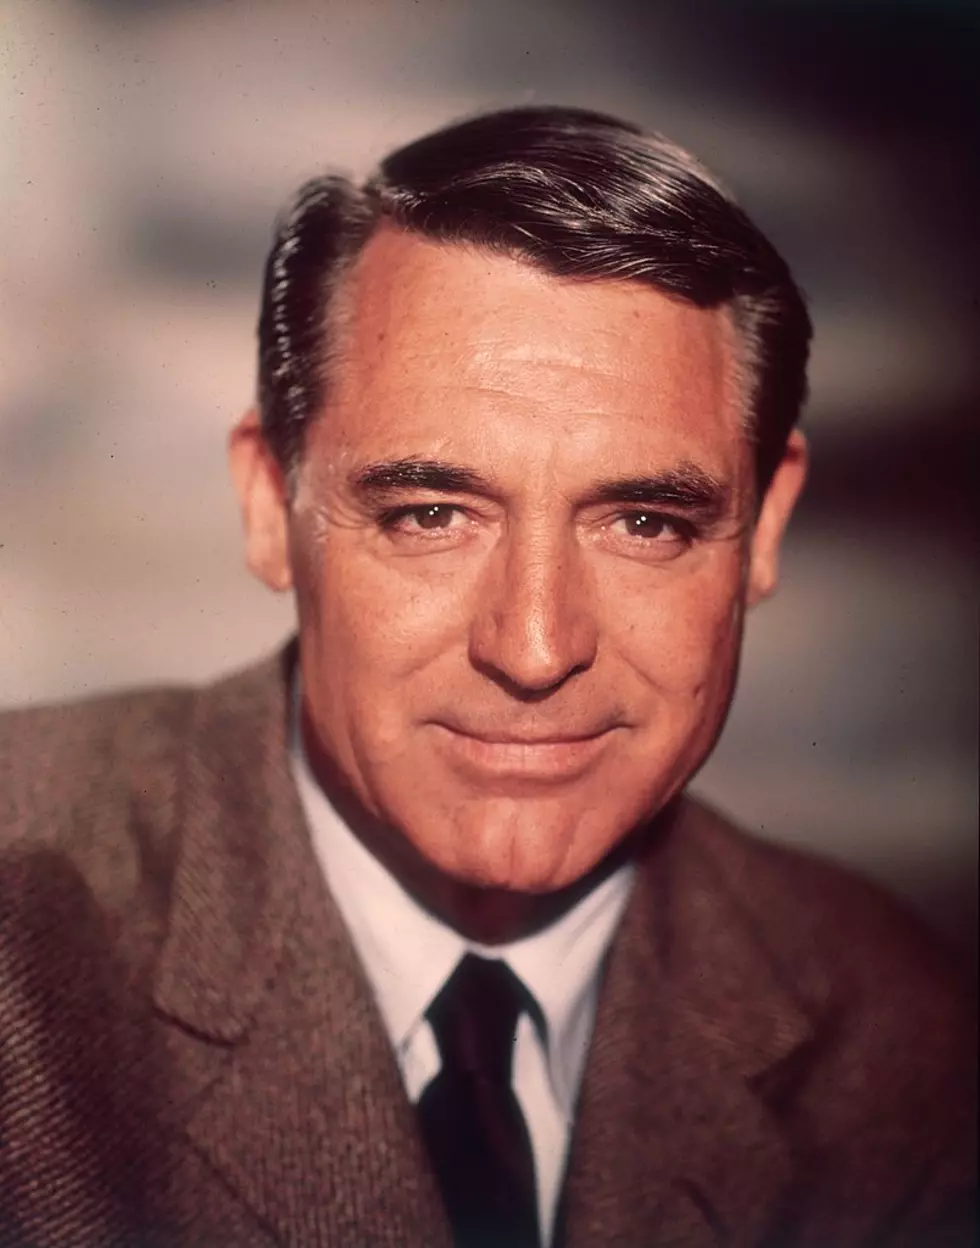 Men, Now You Can Look Like Cary Grant